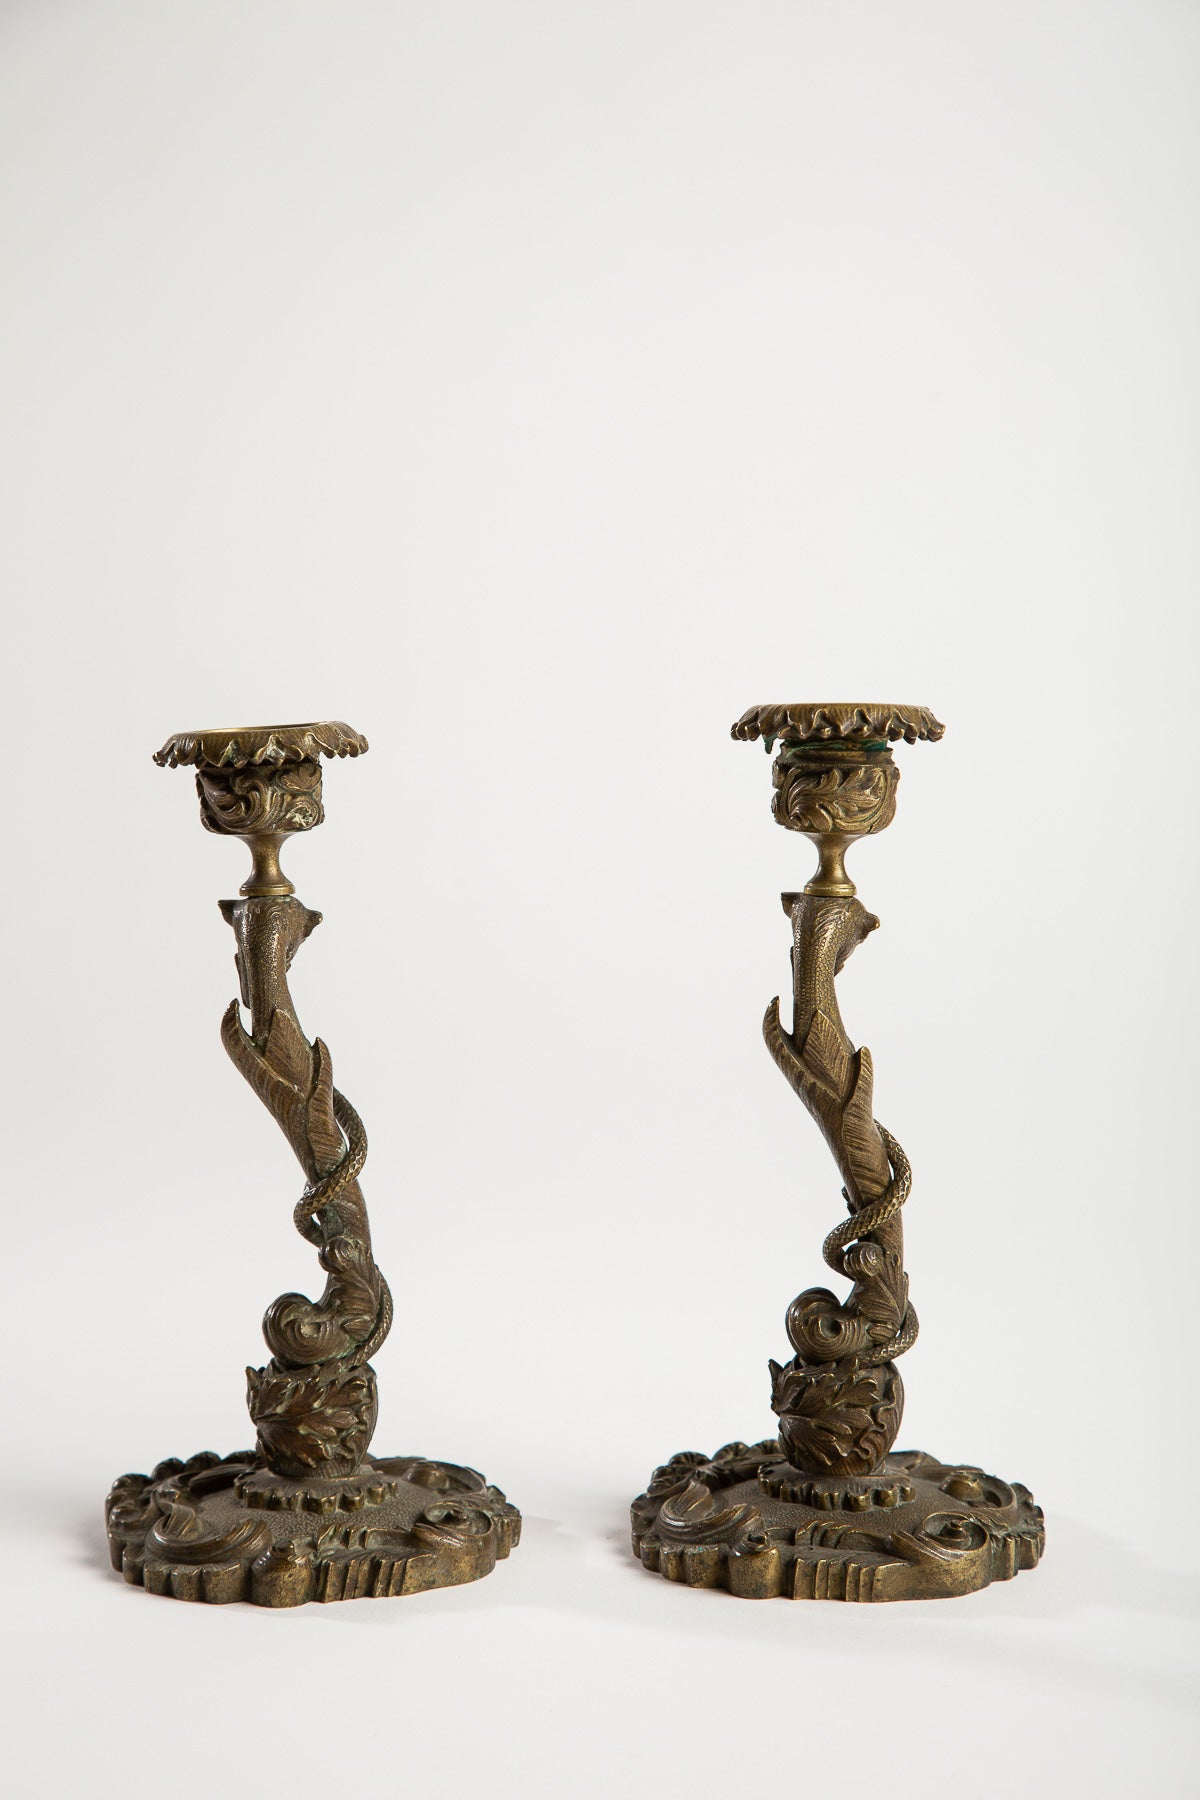 MAXFIELD PRIVATE COLLECTION | PAIR OF DRAGON/SNAKE CANDLESTICKS